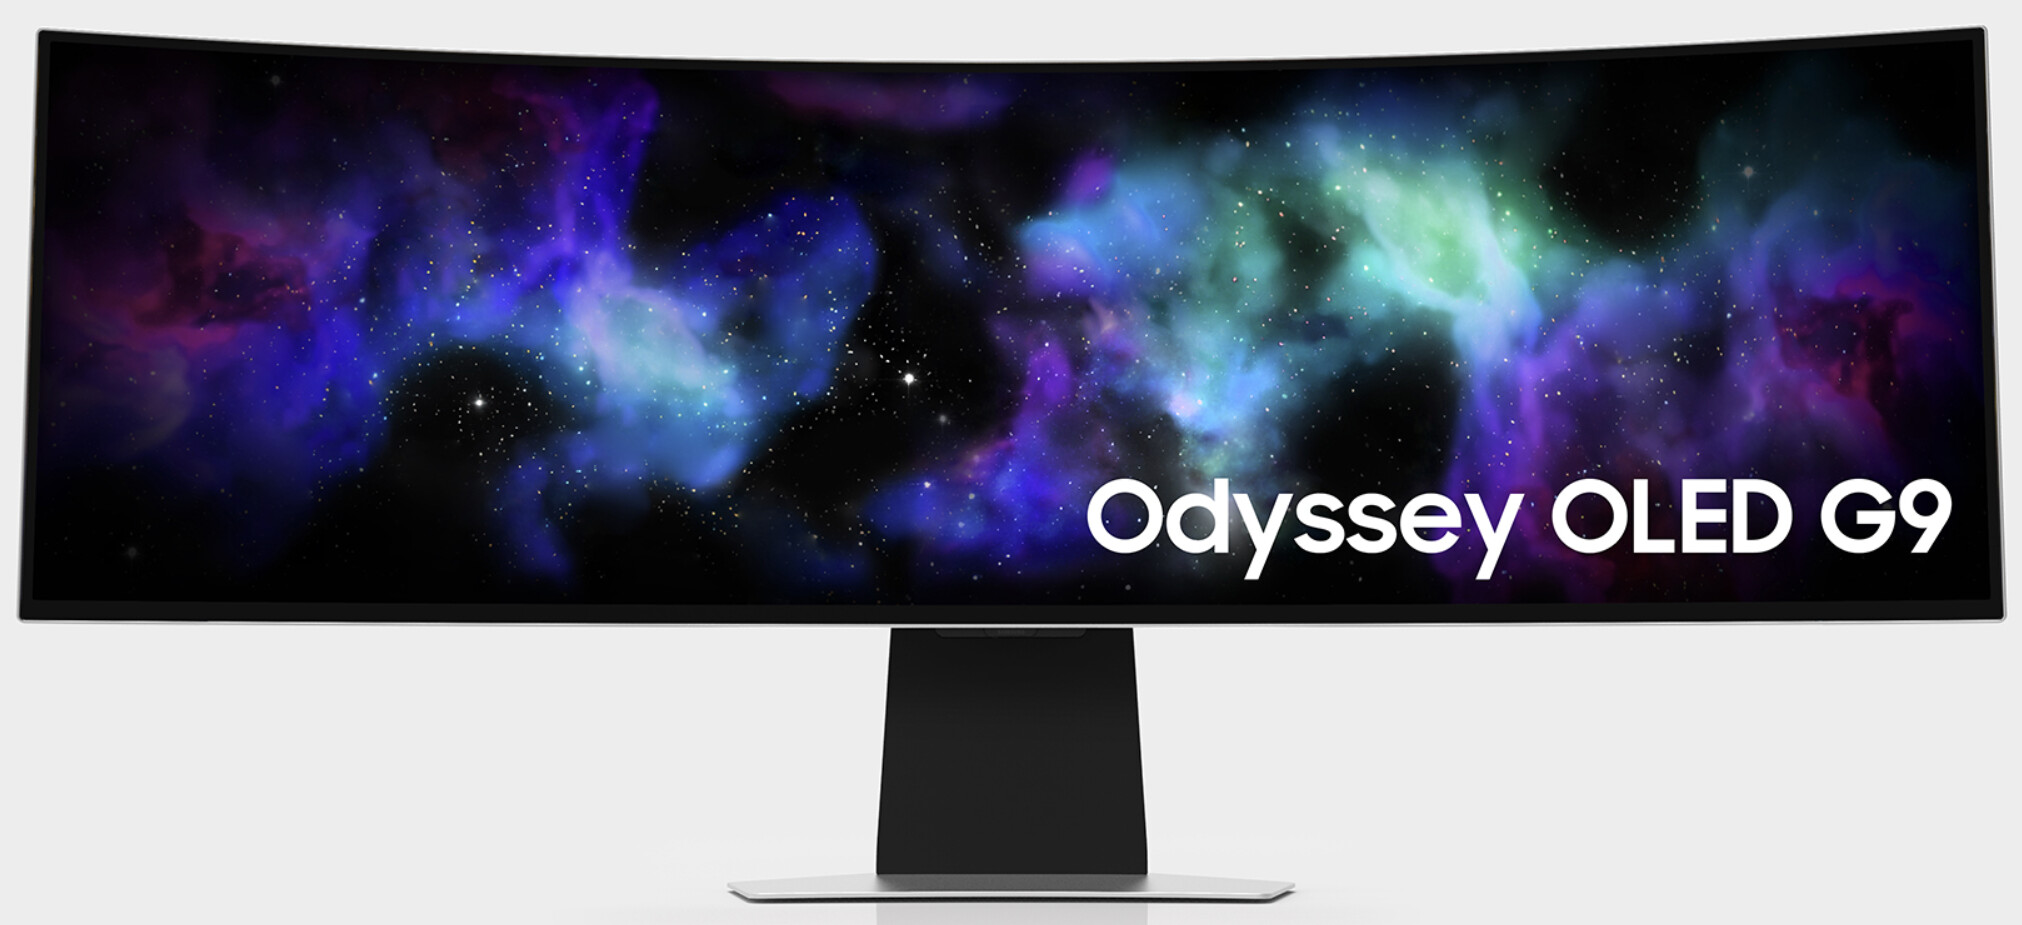 Samsung Odyssey G6 is a gaming monitor and smart TV combo